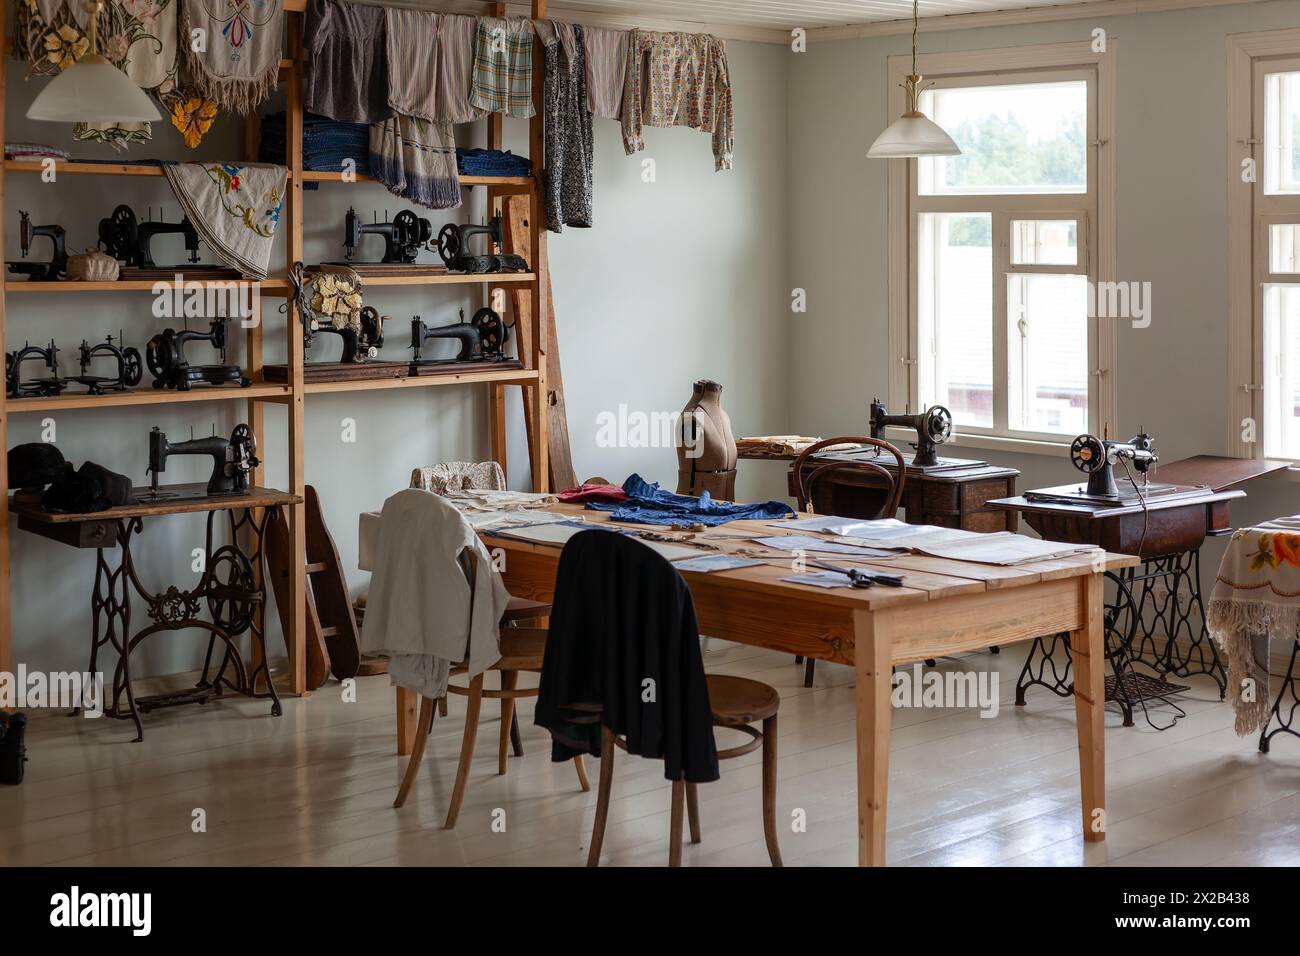 Interior with sewing accessories. Antique sewing machines, clothes for viewing. Stock Photo